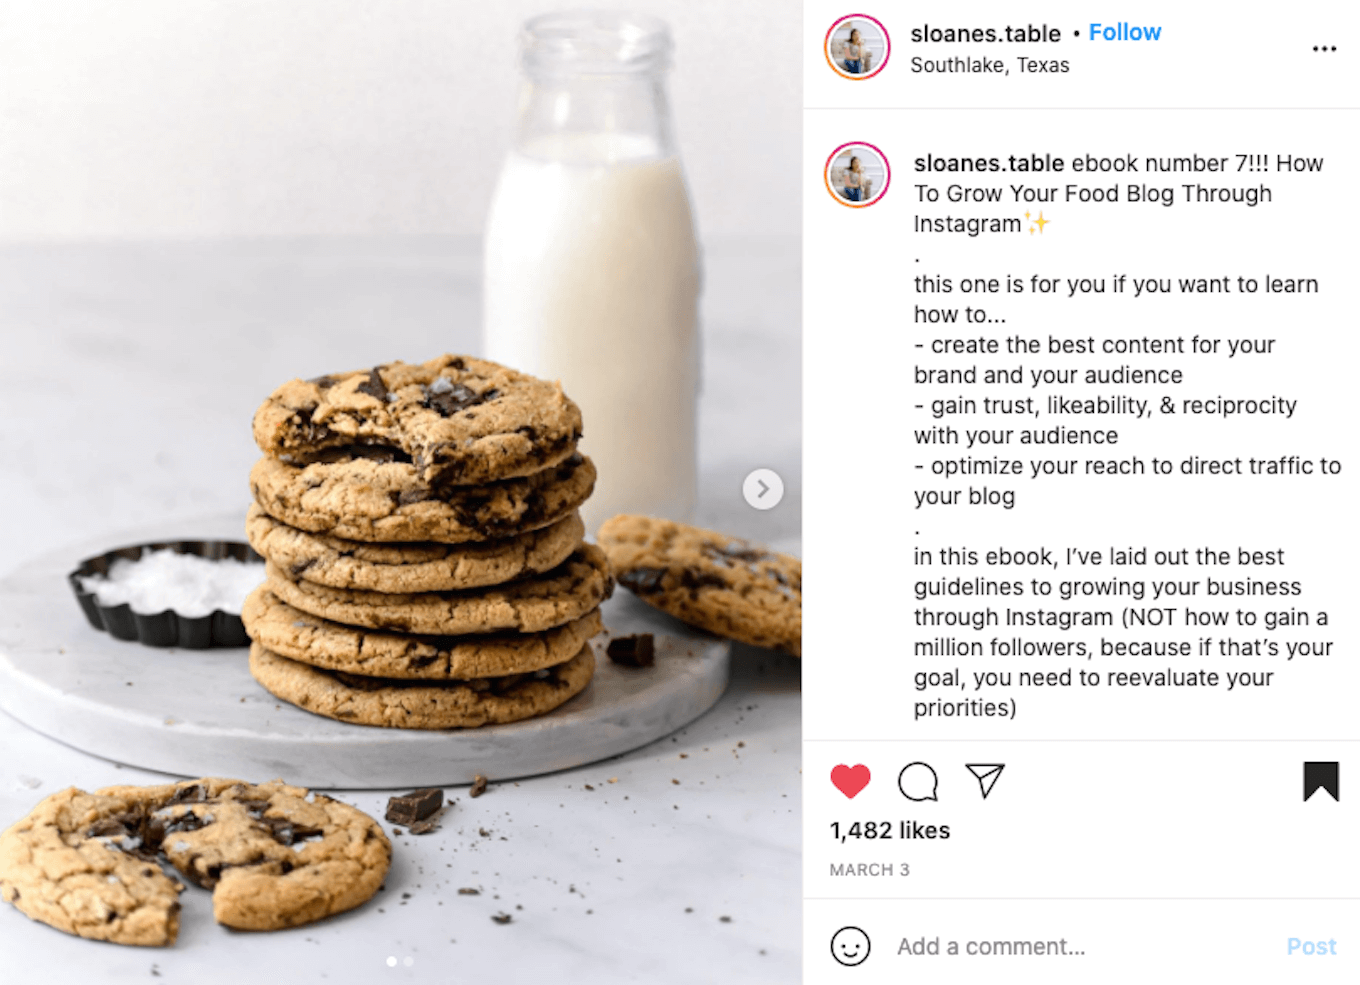 An Instagram photo of chocolate chip cookies and a jar of milk to demonstrate use of props in photography.